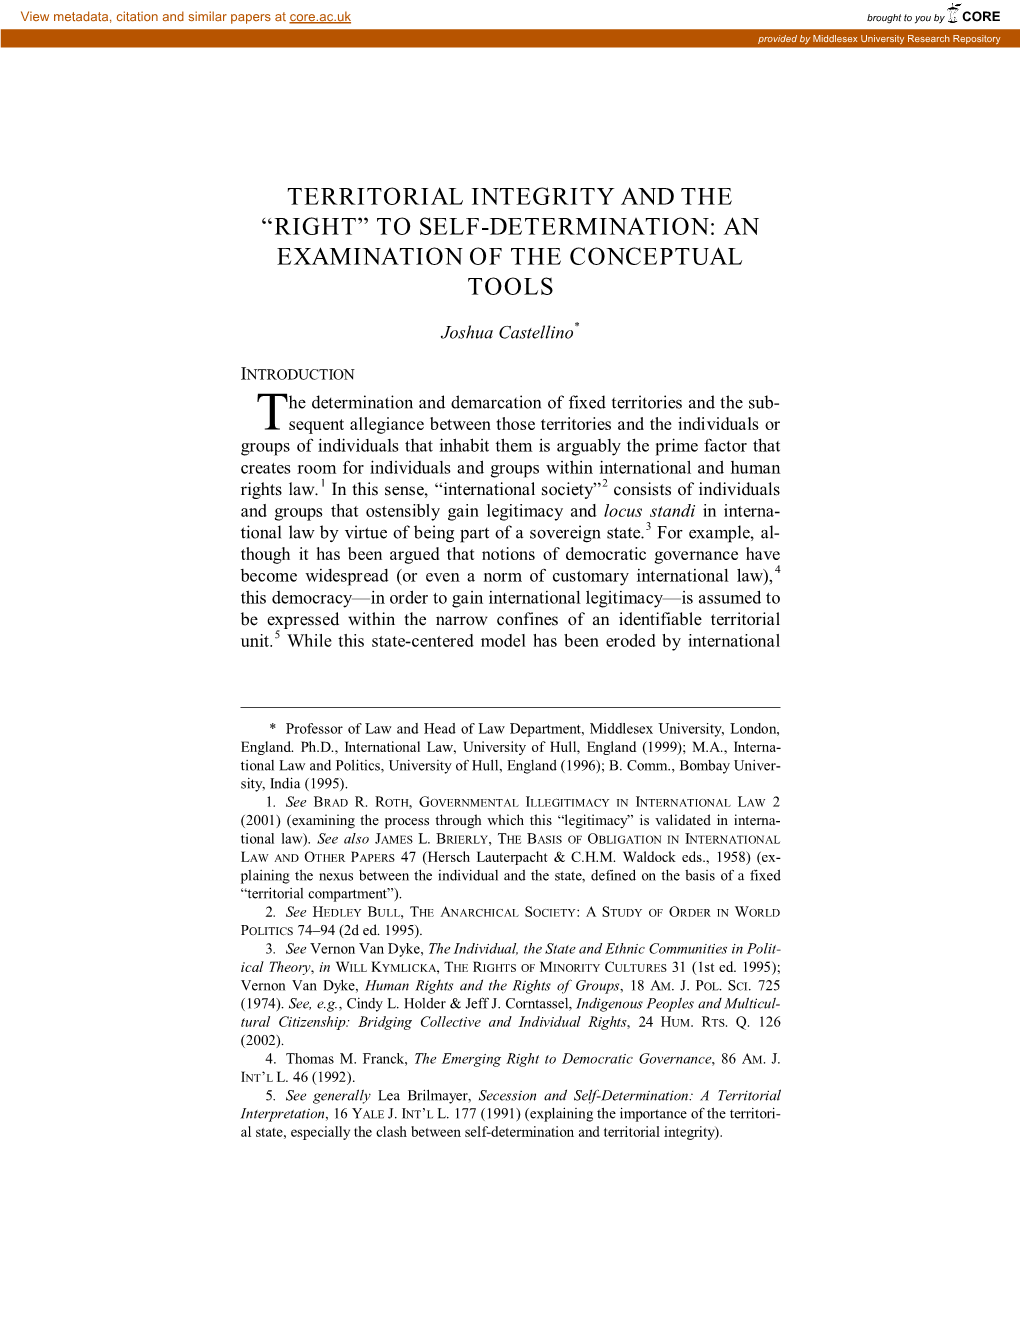 Territorial Integrity and the “Right” to Self-Determination: an Examination of the Conceptual Tools